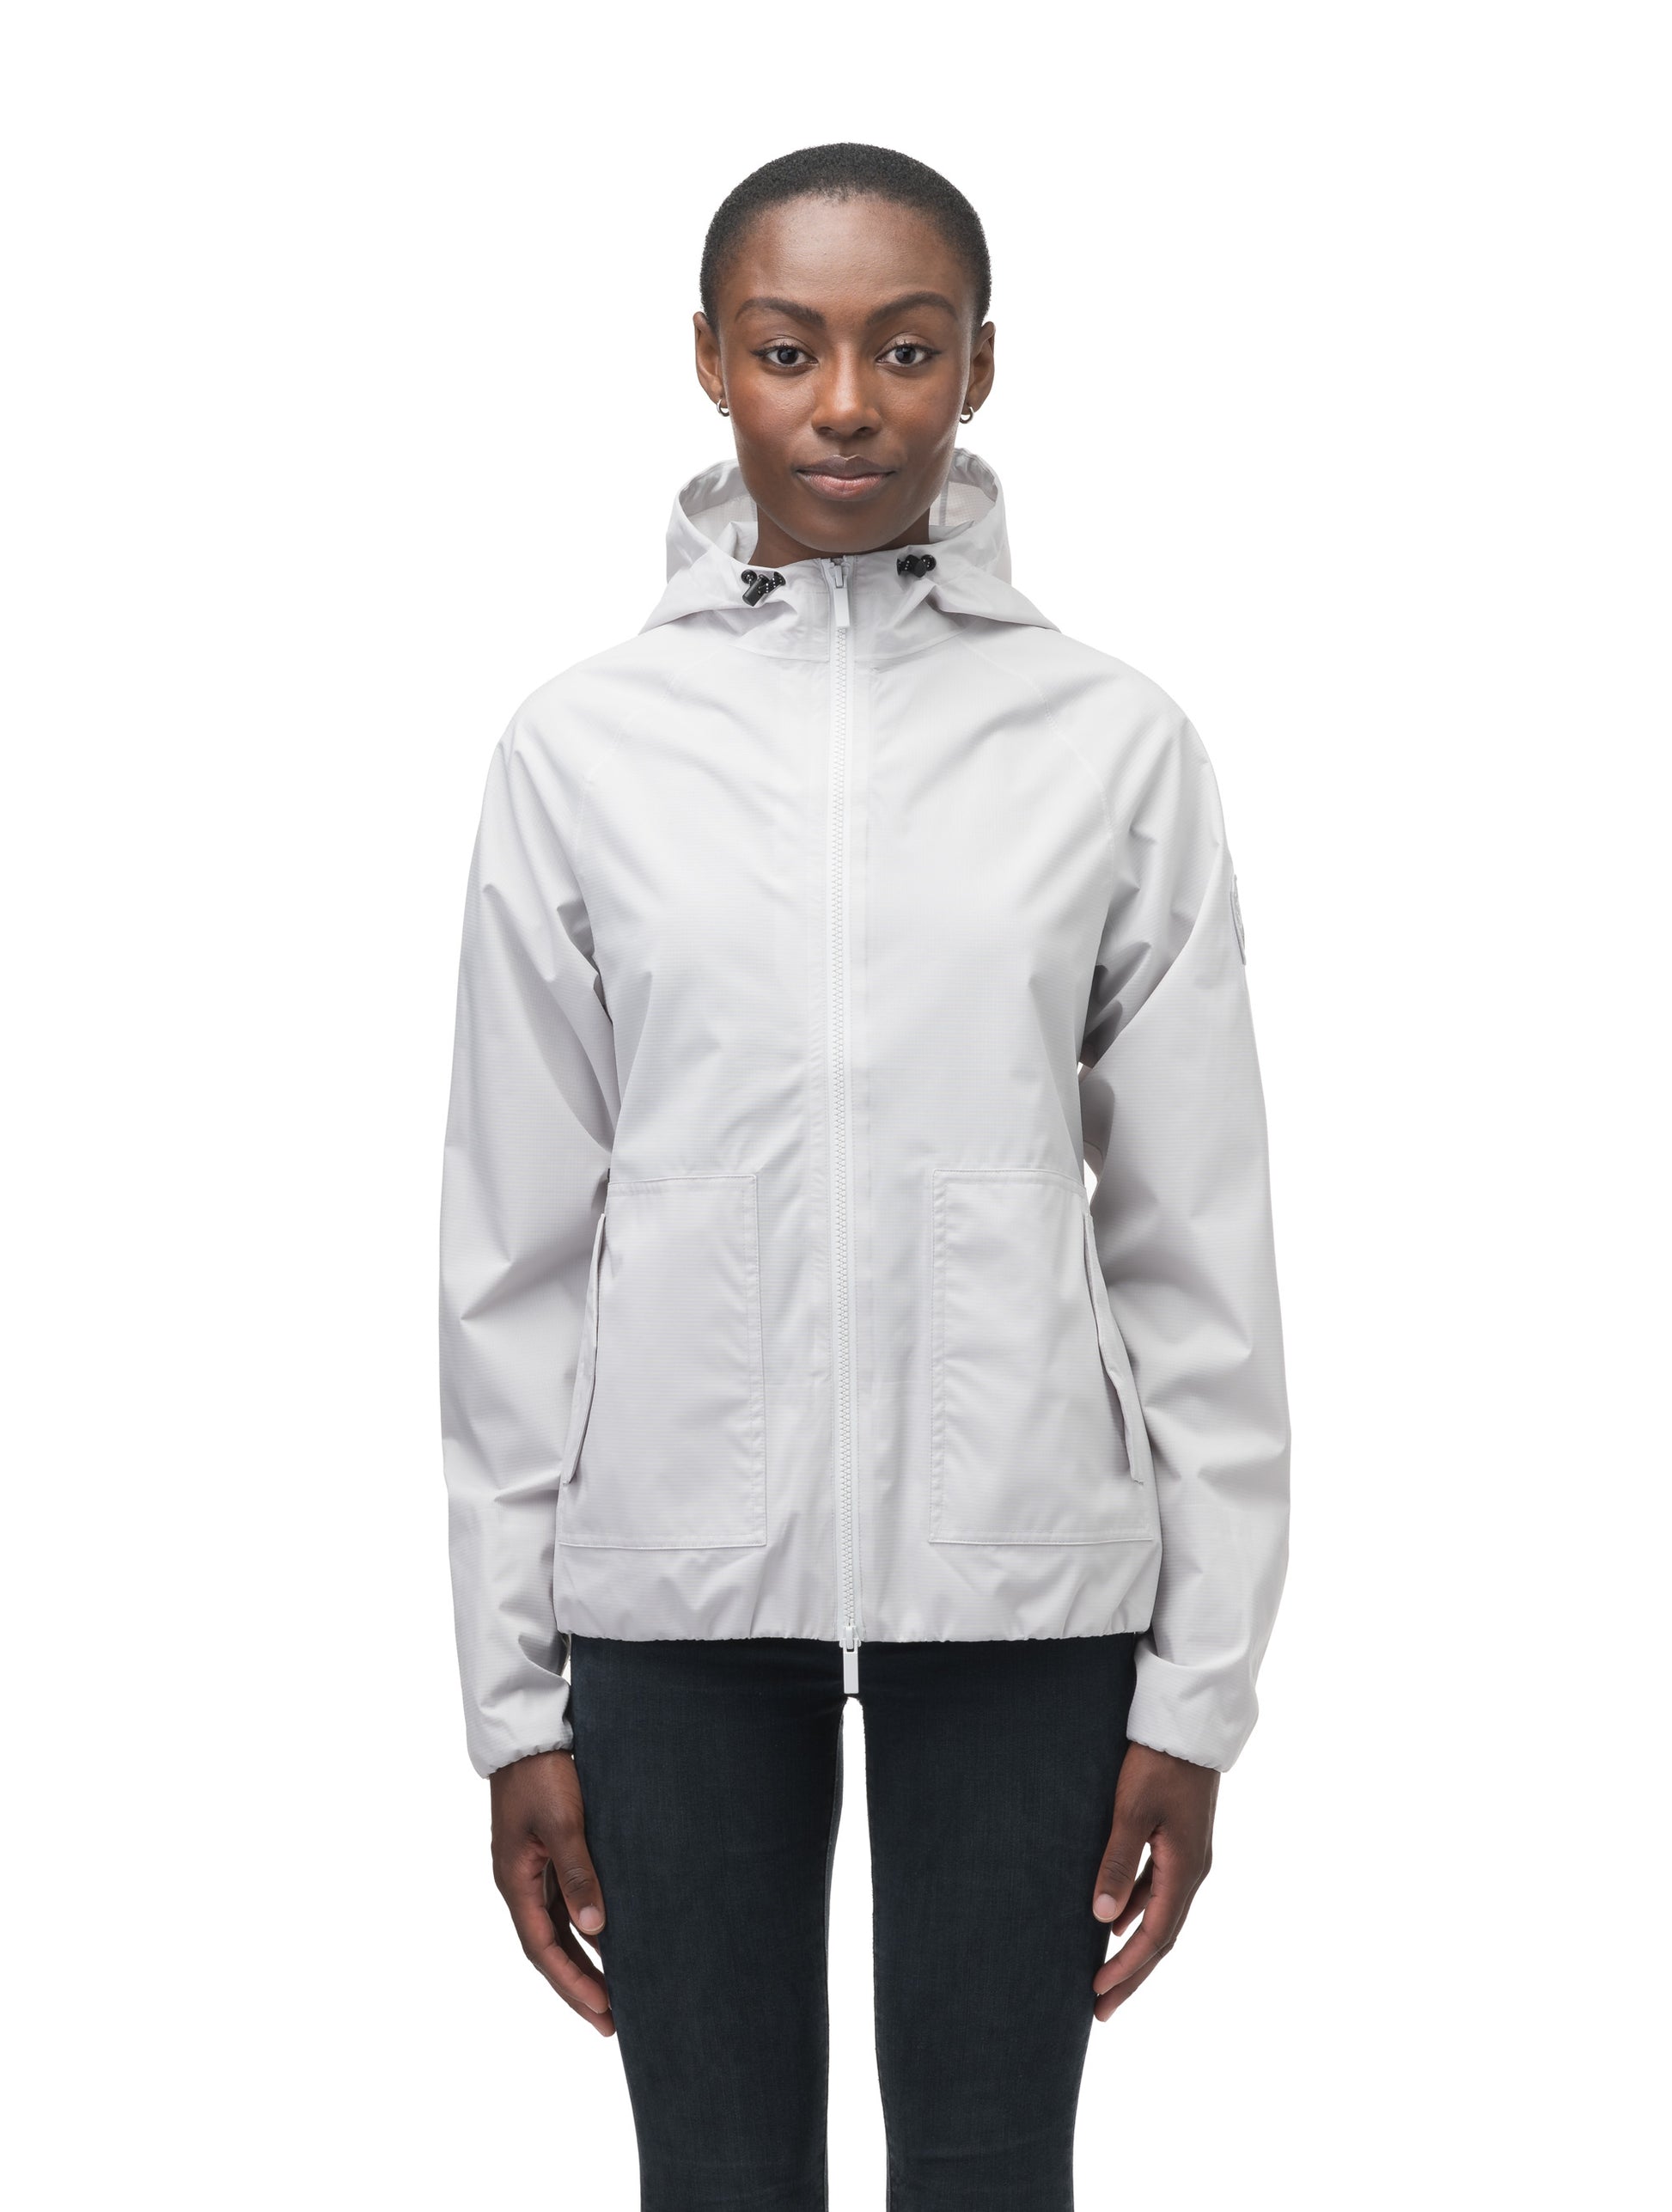 Women's hip length waterproof jacket with non-removable hood and two-way zipper in Light Grey